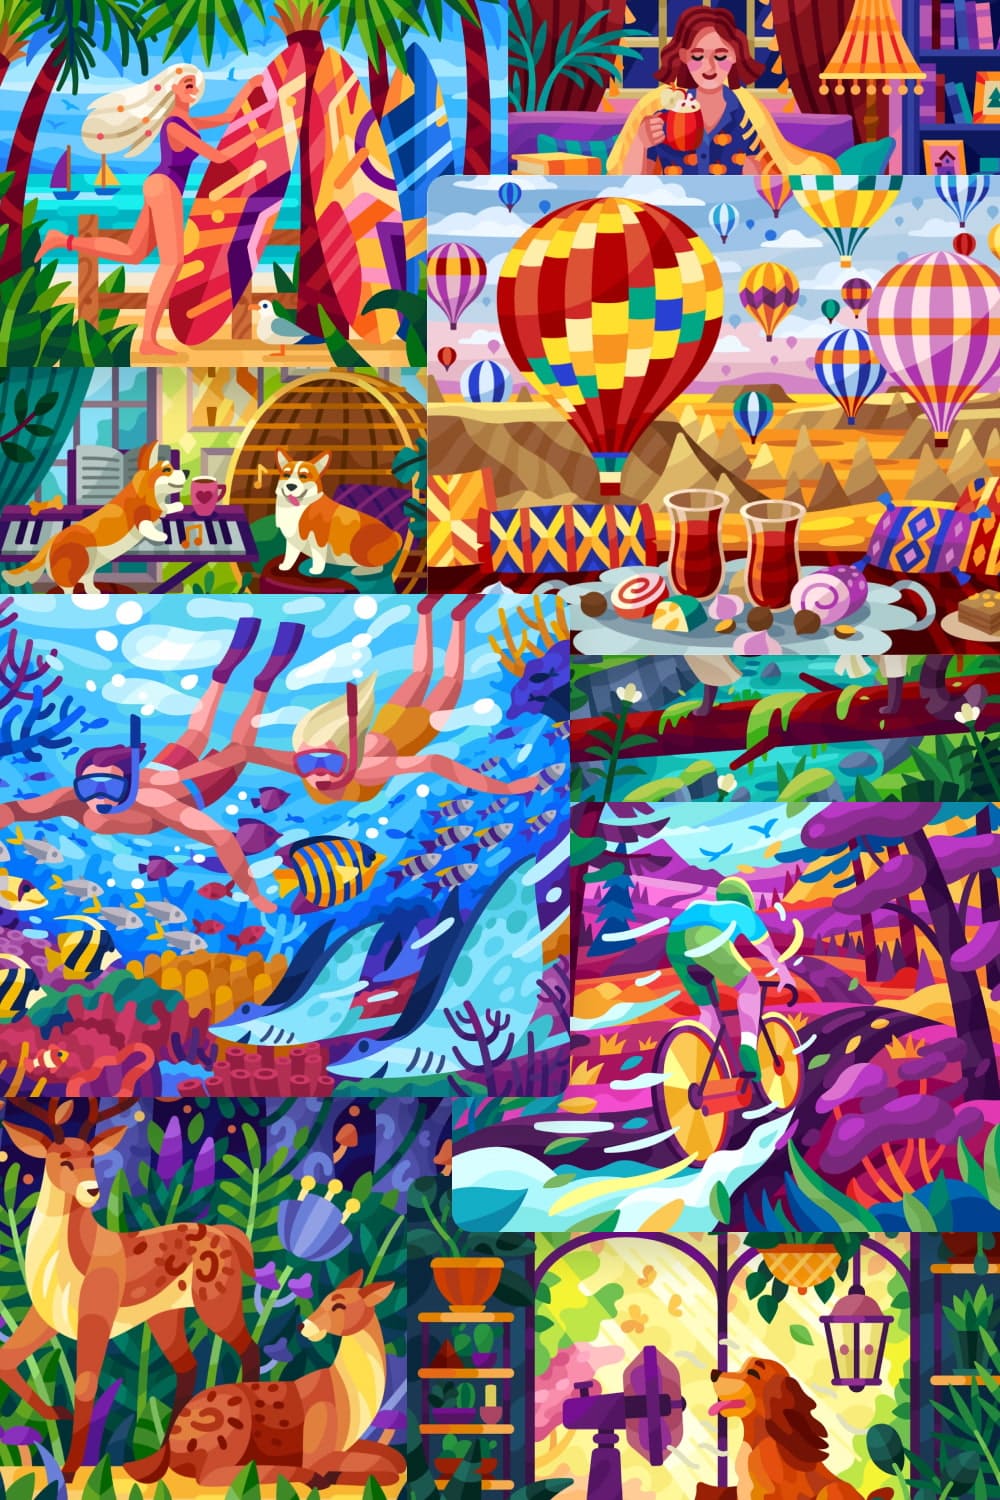 Illustration with very bright colors in a mosaic style.